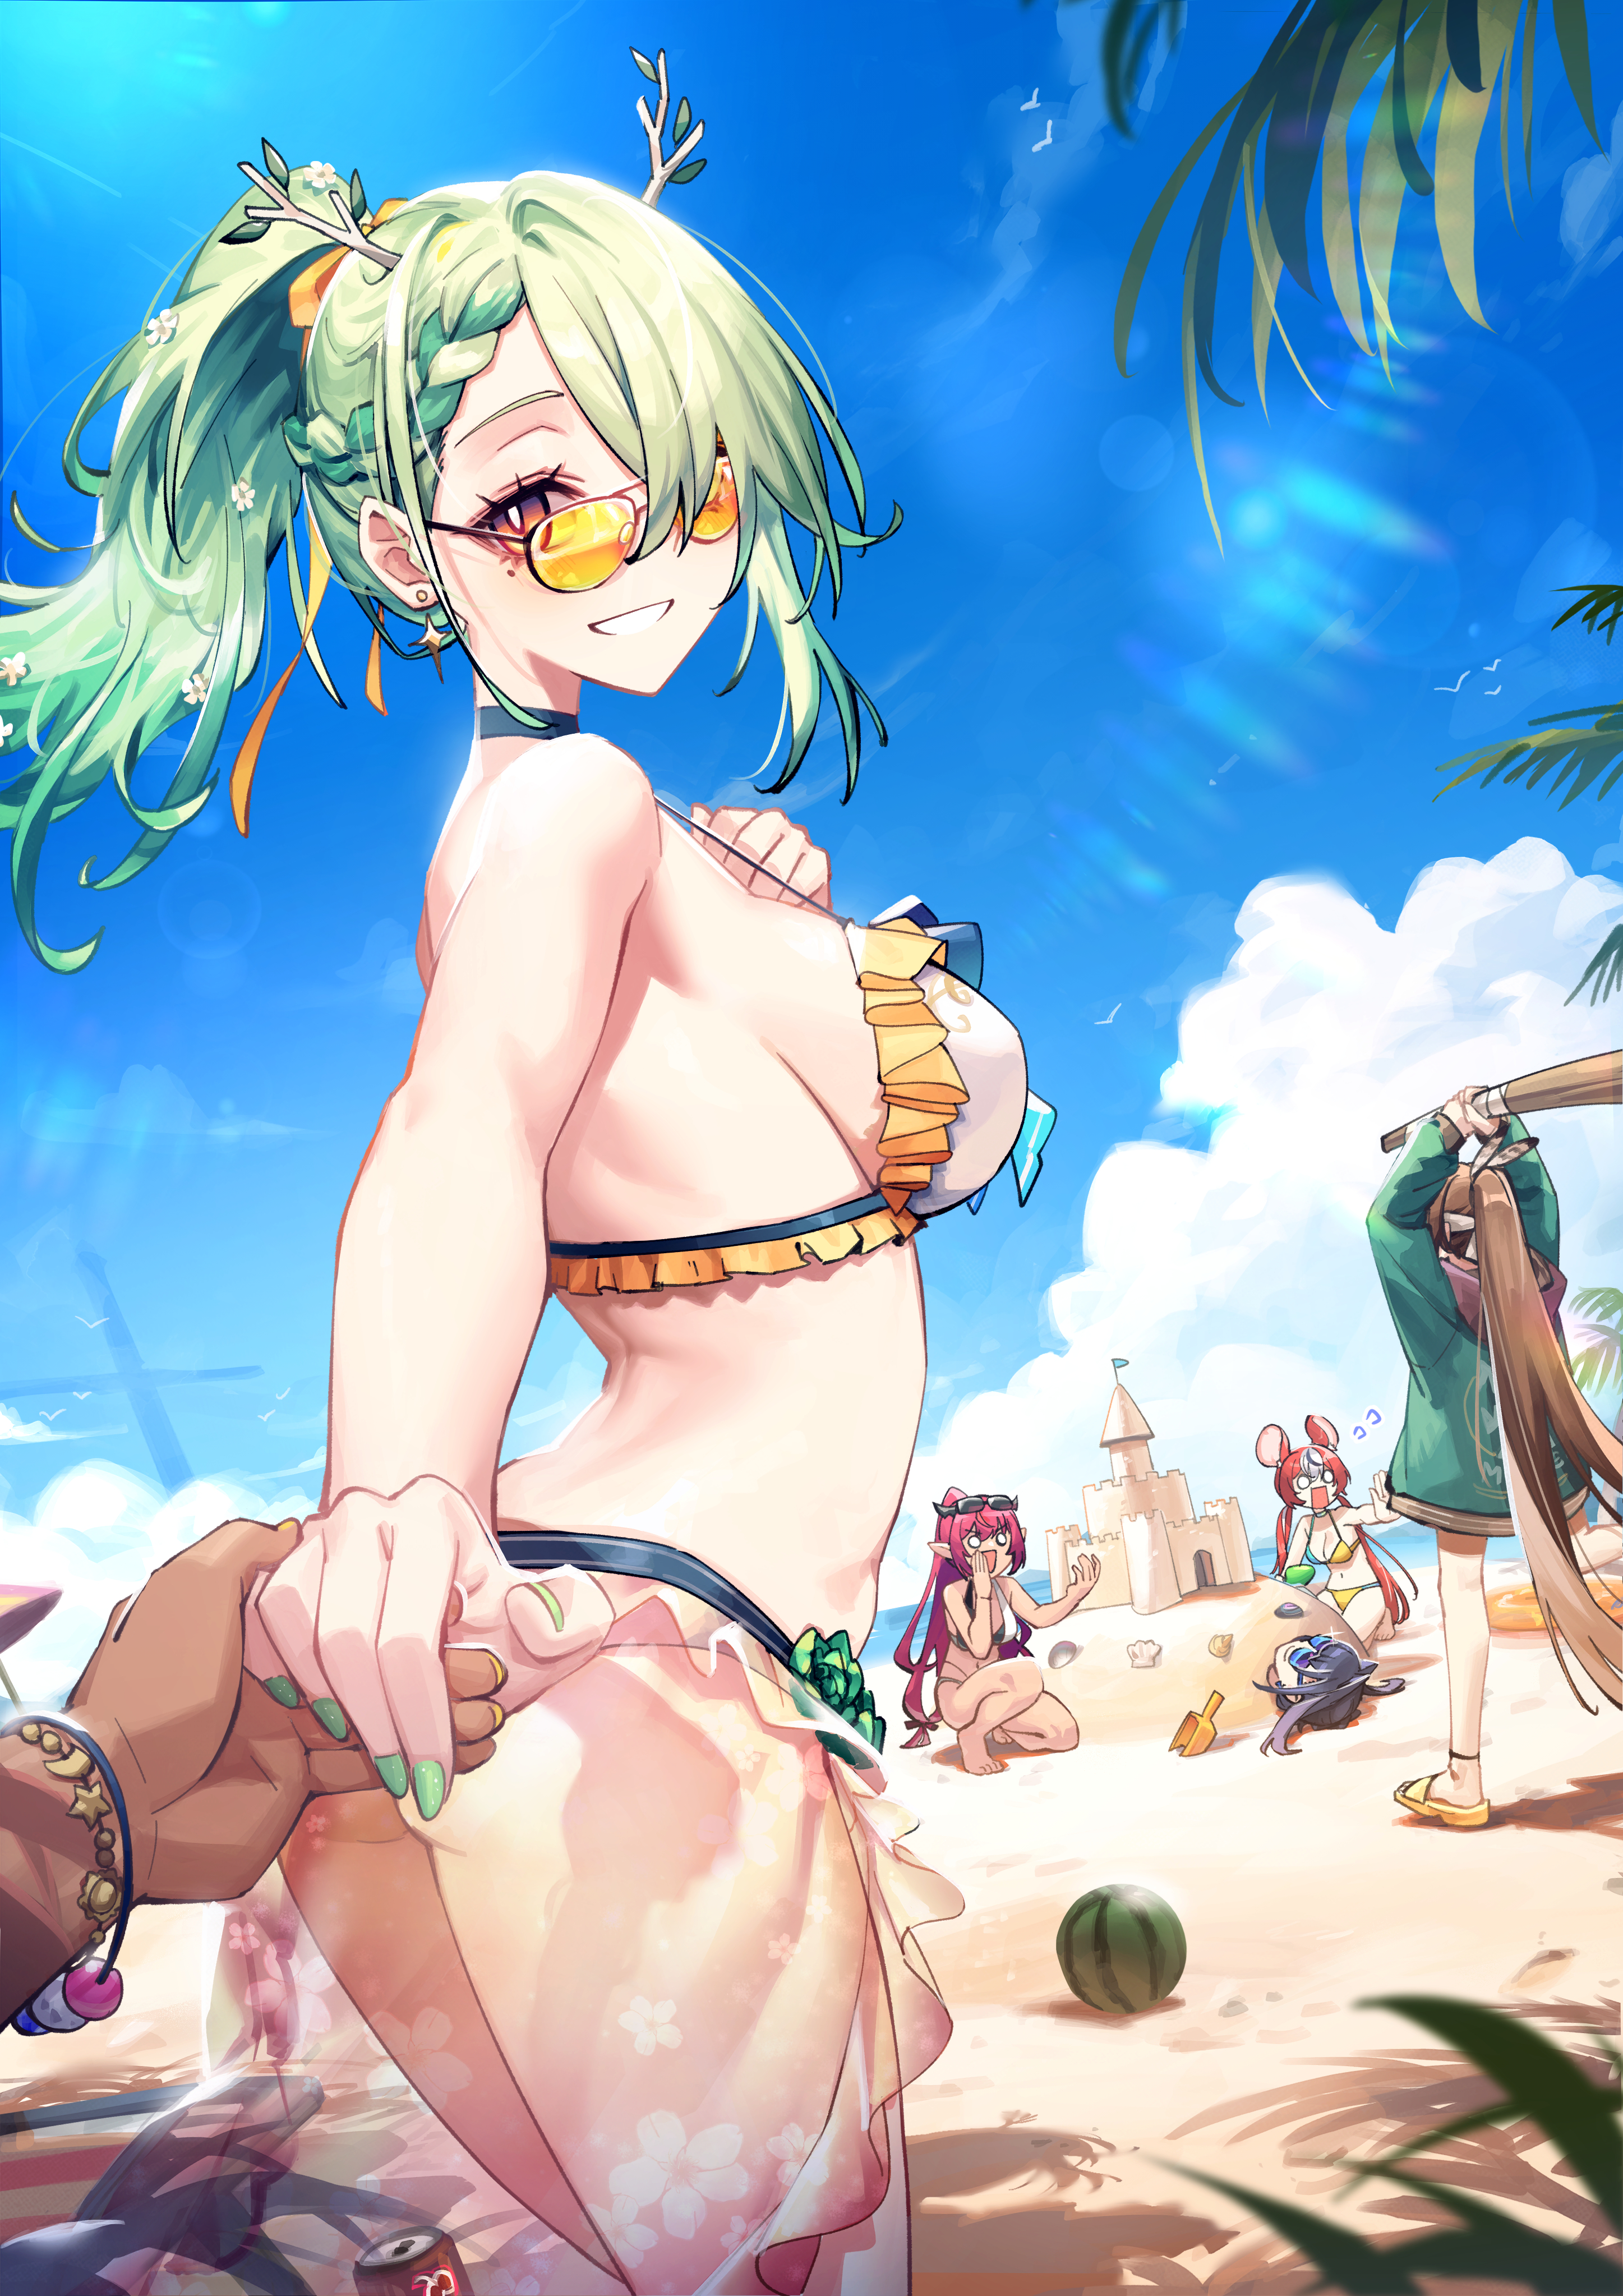 Anime 2894x4093 Adarin Hololive English Hololive Ceres Fauna Hakos Baelz beach IRyS (Hololive) bikini Nanashi Mumei boobs Ouro Kronii Tsukumo Sana group of women clouds women on beach sky women outdoors portrait display POV looking at viewer fruit watermelons choker sideboob long hair sunglasses glasses sand sculpture sand castle looking back smiling green hair ponytail mole under eye brunette yellow bikini sunlight green nails bracelets palm trees leaves flower in hair humor flowers anime girls butt crack hands on chest sand braids holding hands moles Virtual Youtuber